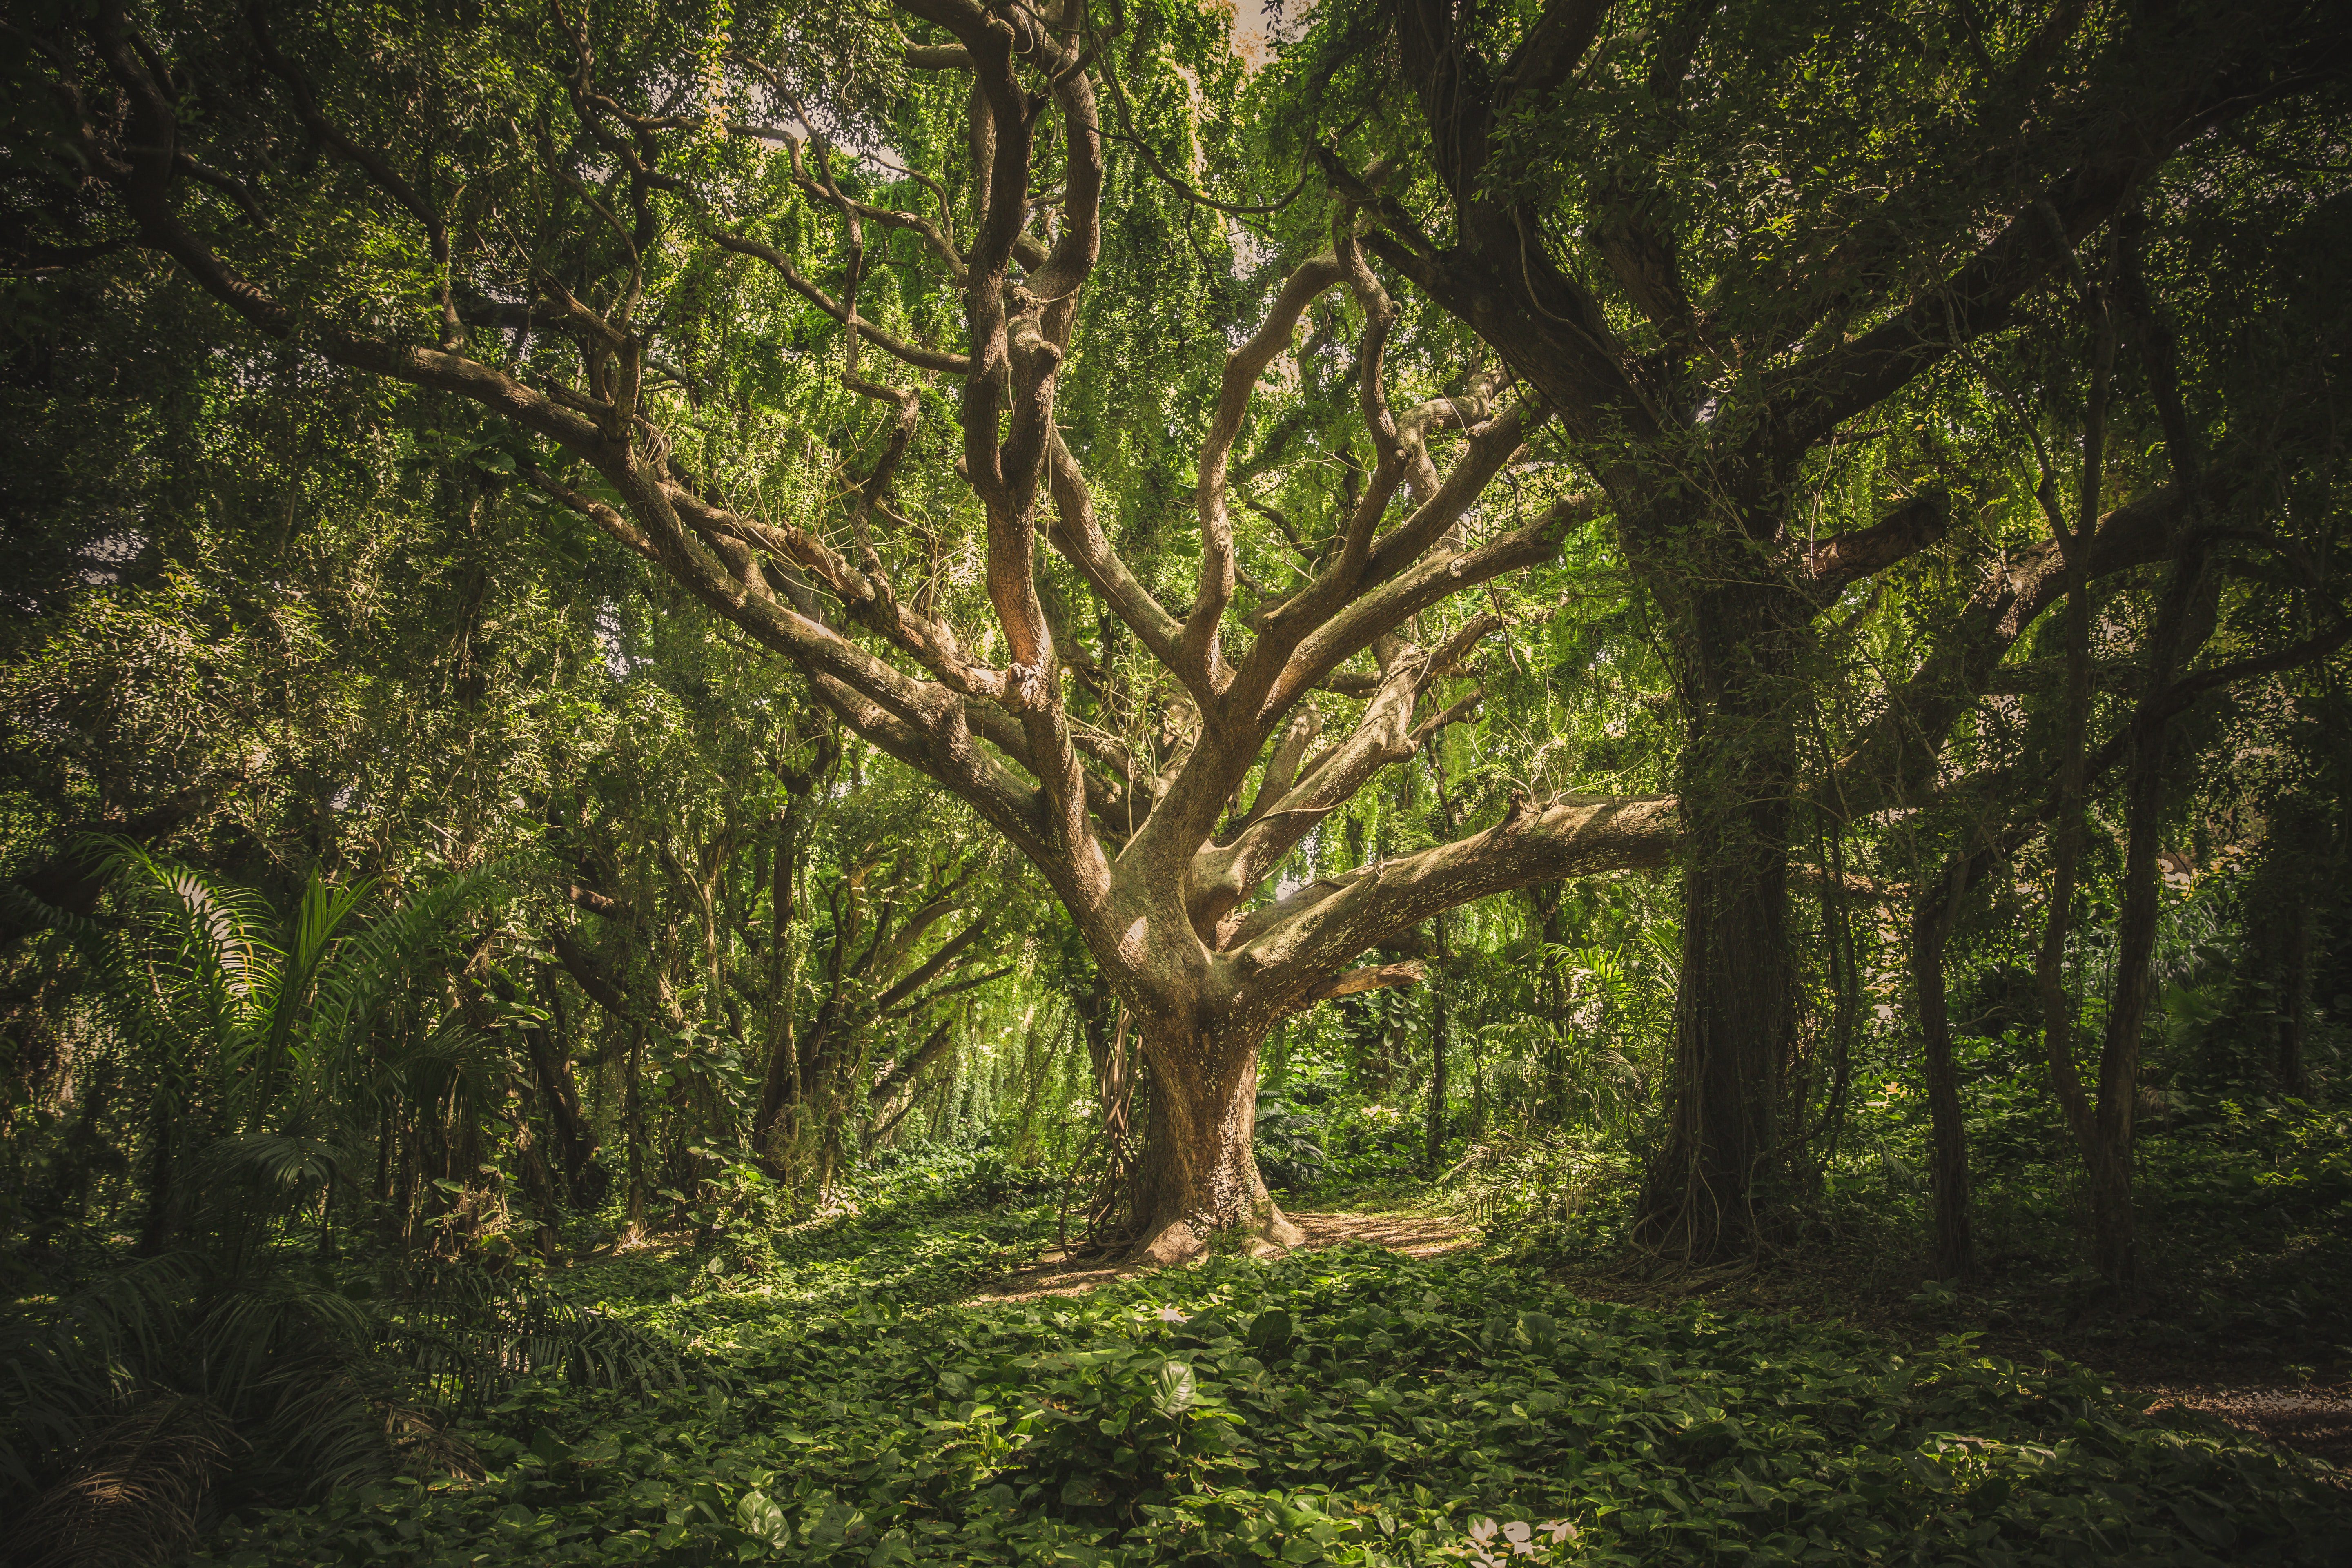 A beautiful tree with many branches at the centre of a leafy glen in the forest. Photo by veeterzy on Unsplash